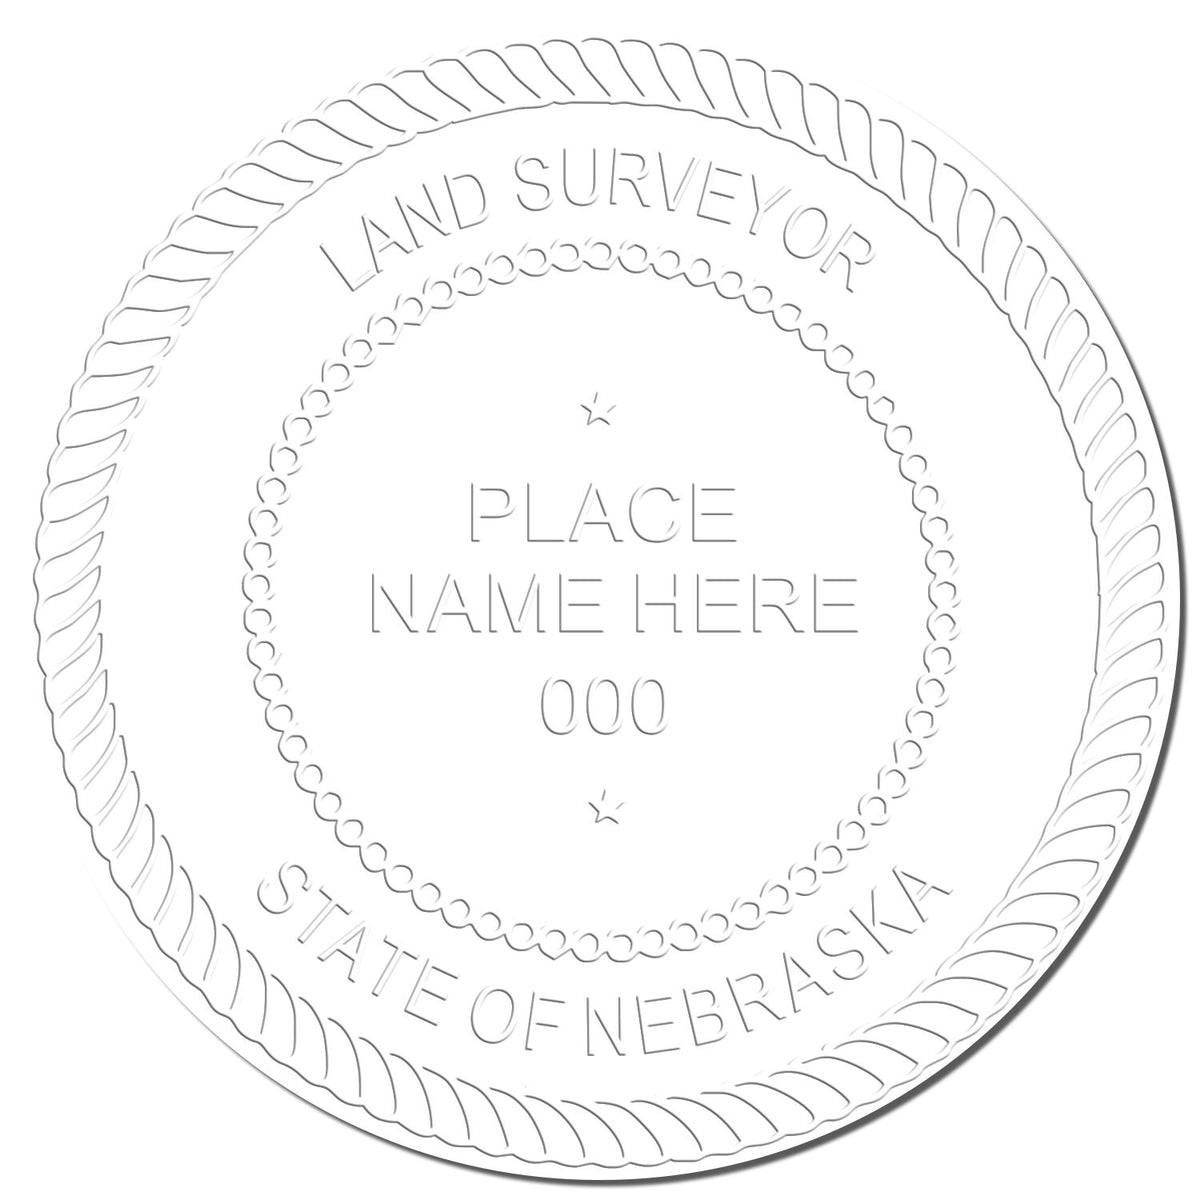 This paper is stamped with a sample imprint of the Hybrid Nebraska Land Surveyor Seal, signifying its quality and reliability.